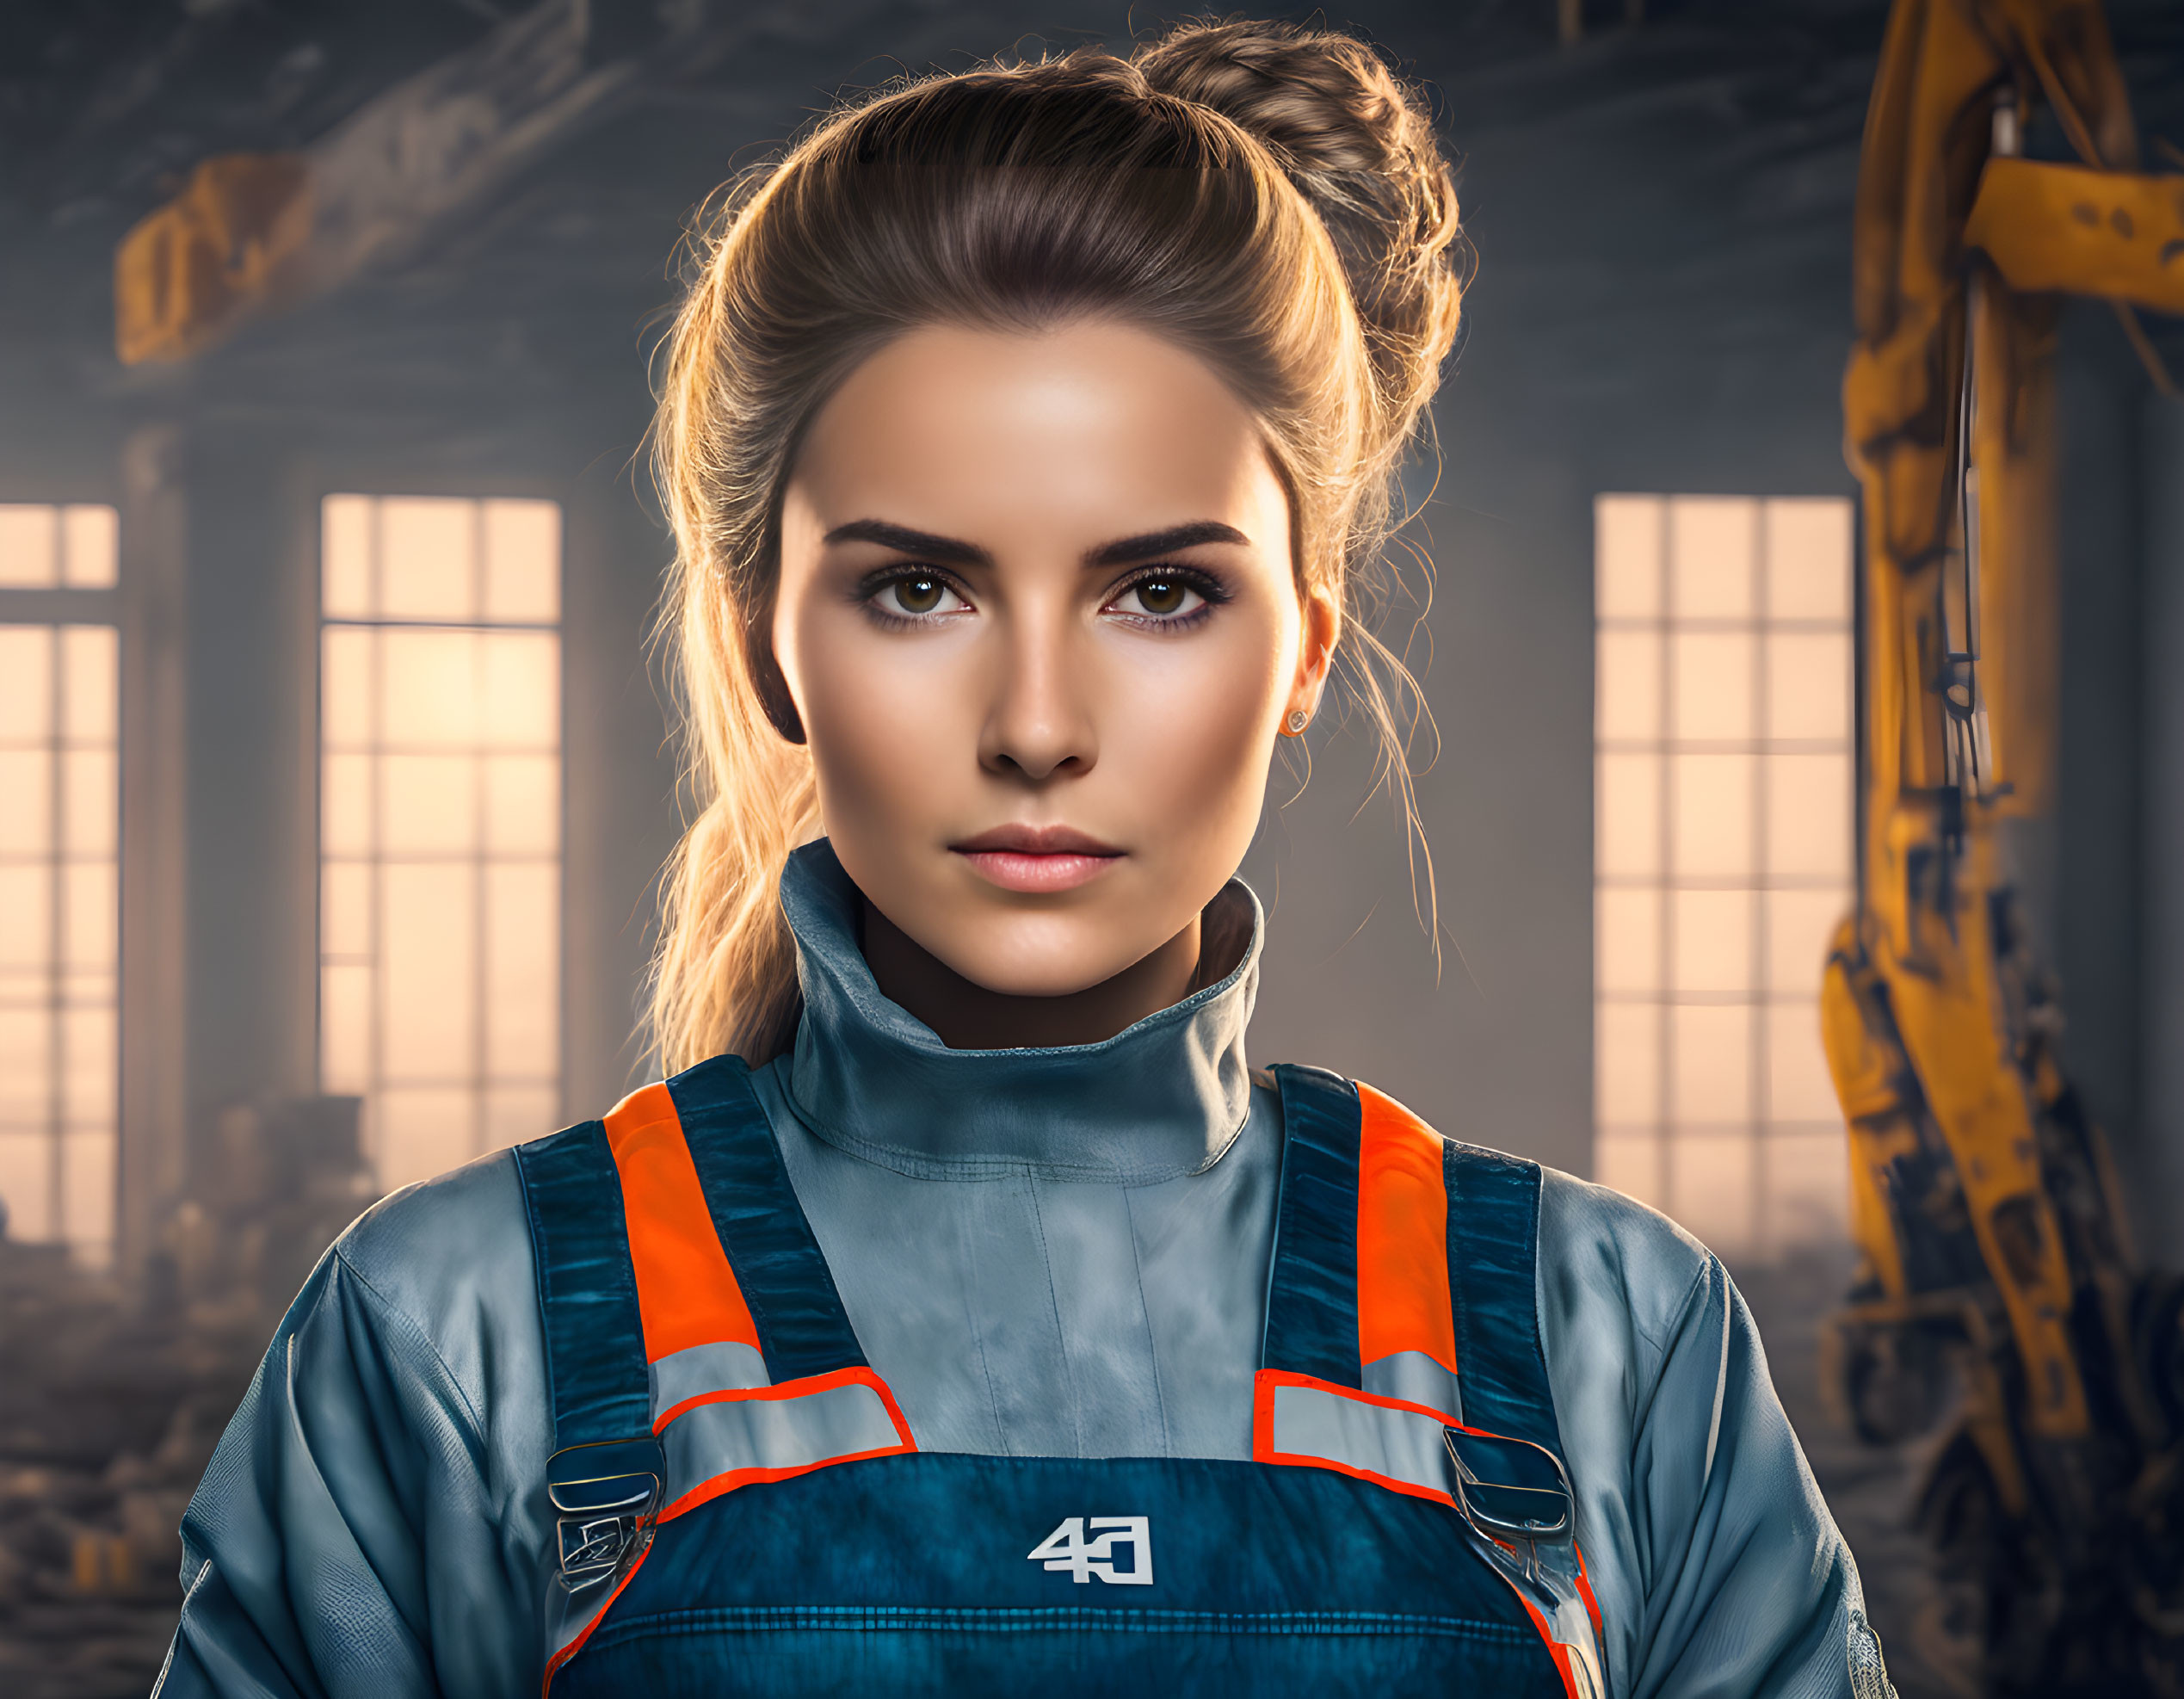 Confident woman in blue and orange jumpsuit in industrial setting